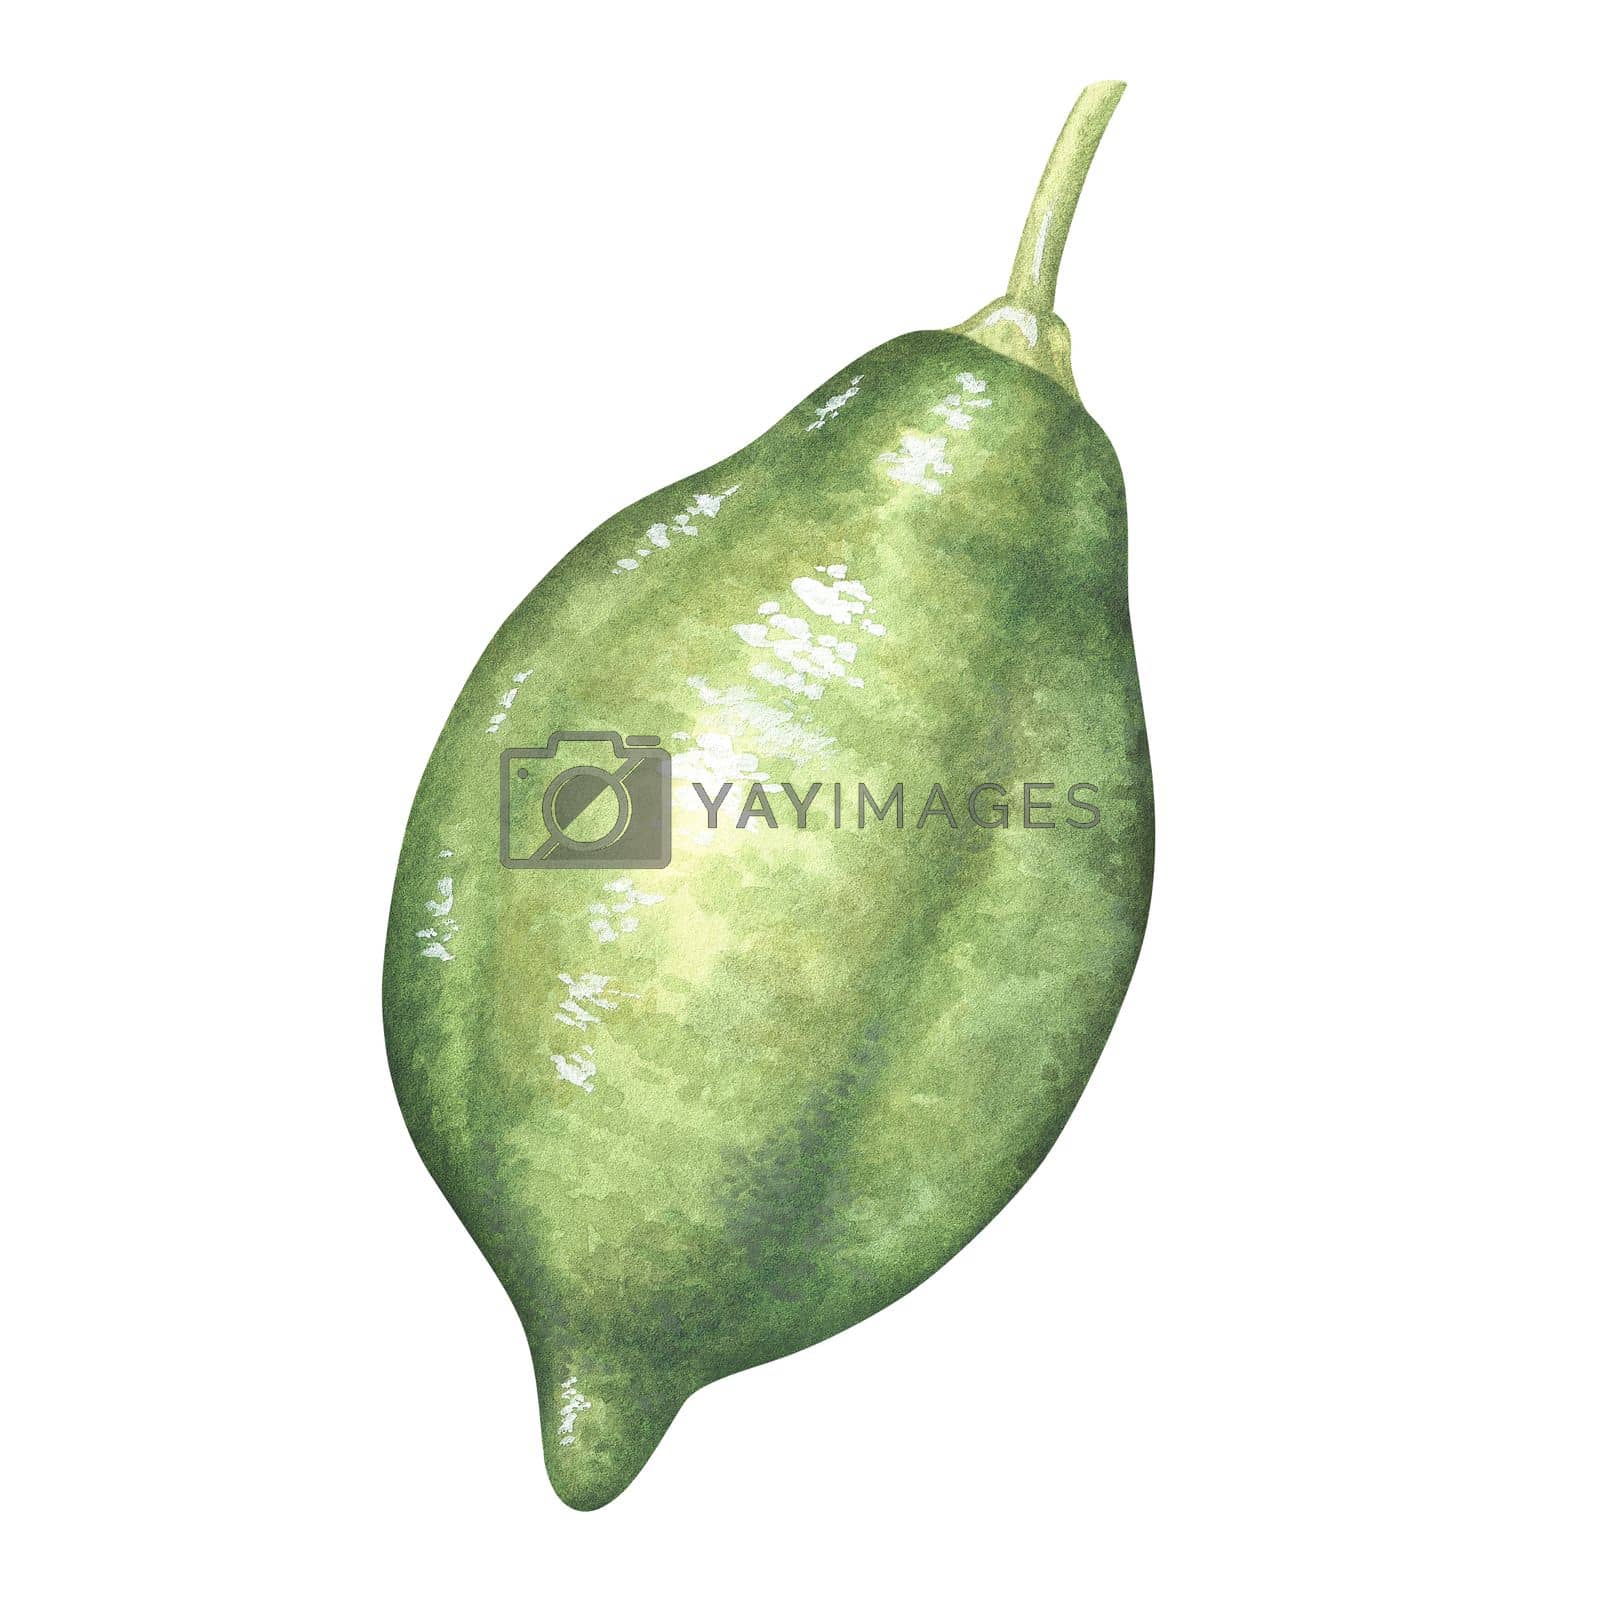 Royalty free image of Green unripe lemon. Lime on the stalk. Watercolor illustration. Isolated on a white background. For your design stickers, nature prints, product packaging with citrus acid or scent by Trilisti